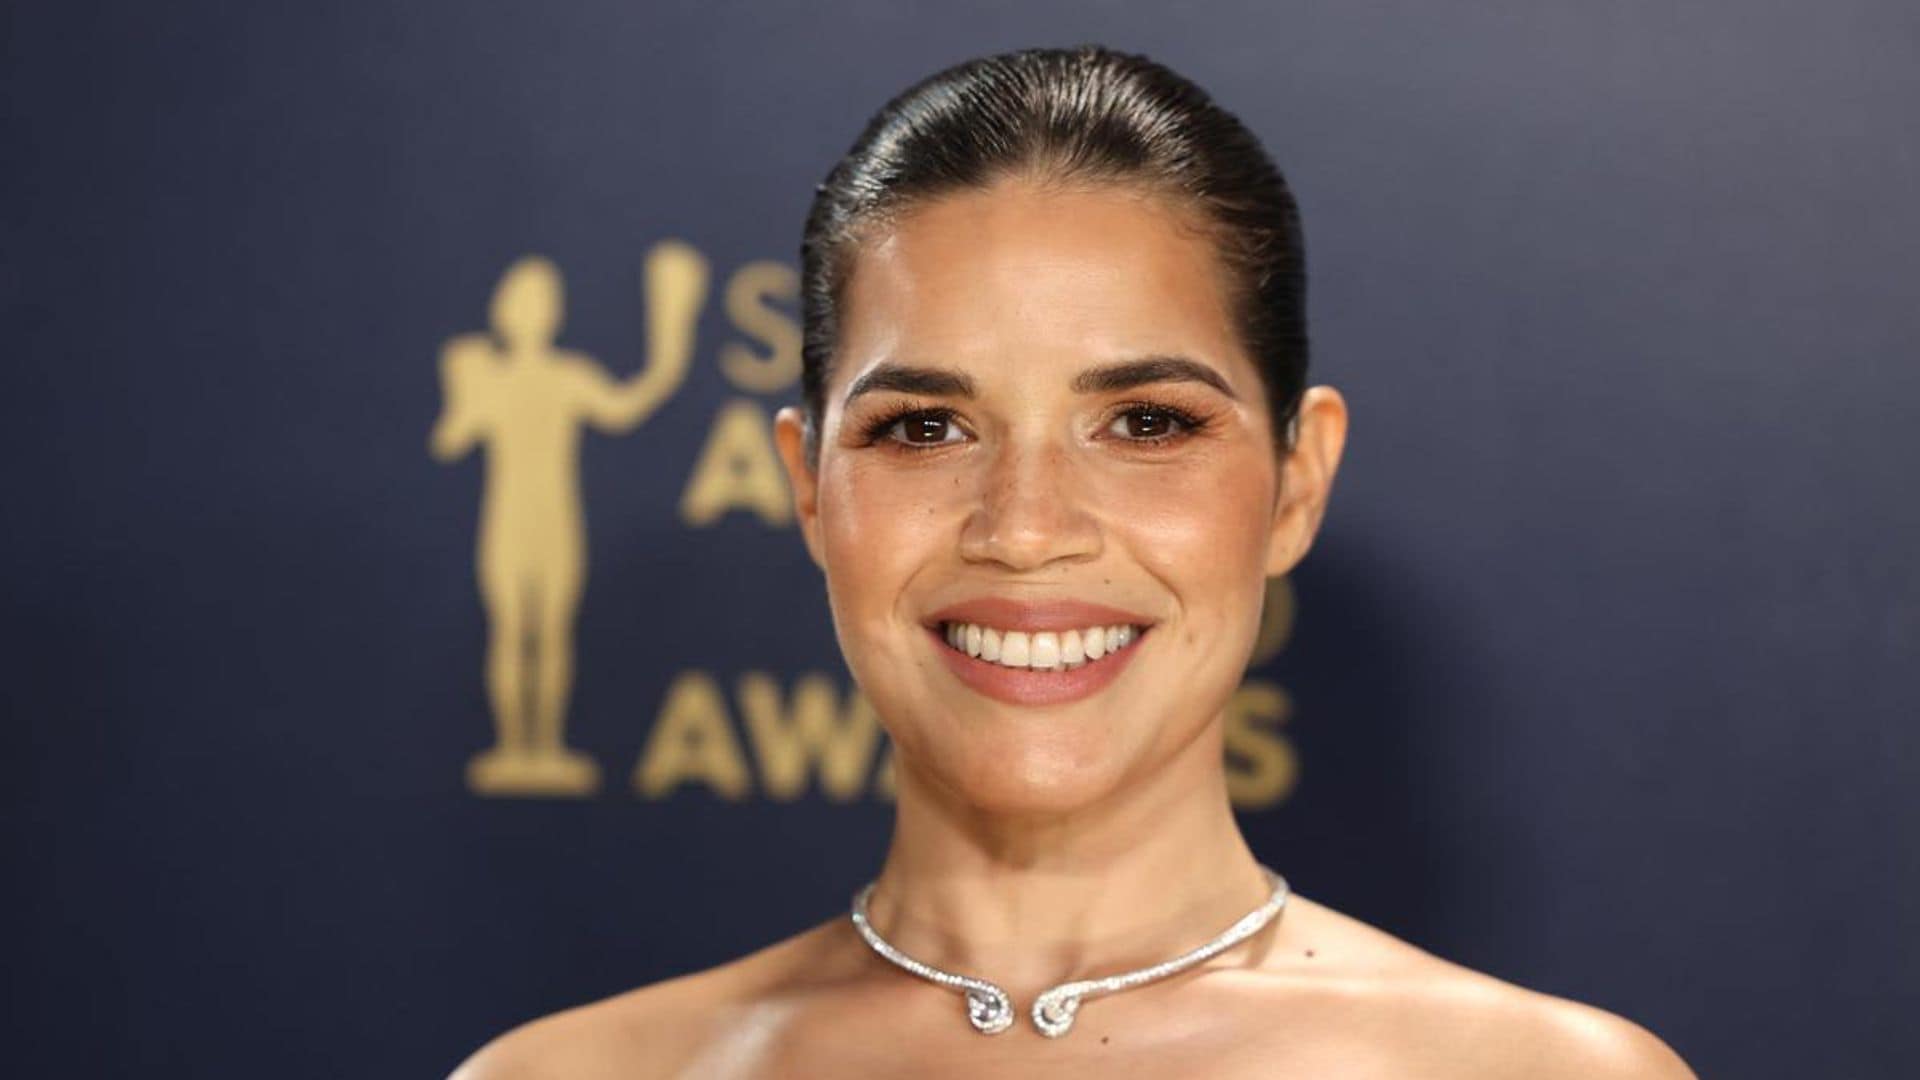 America Ferrera’s directorial debut, ‘I Am Not Your Perfect Mexican Daughter', is in development